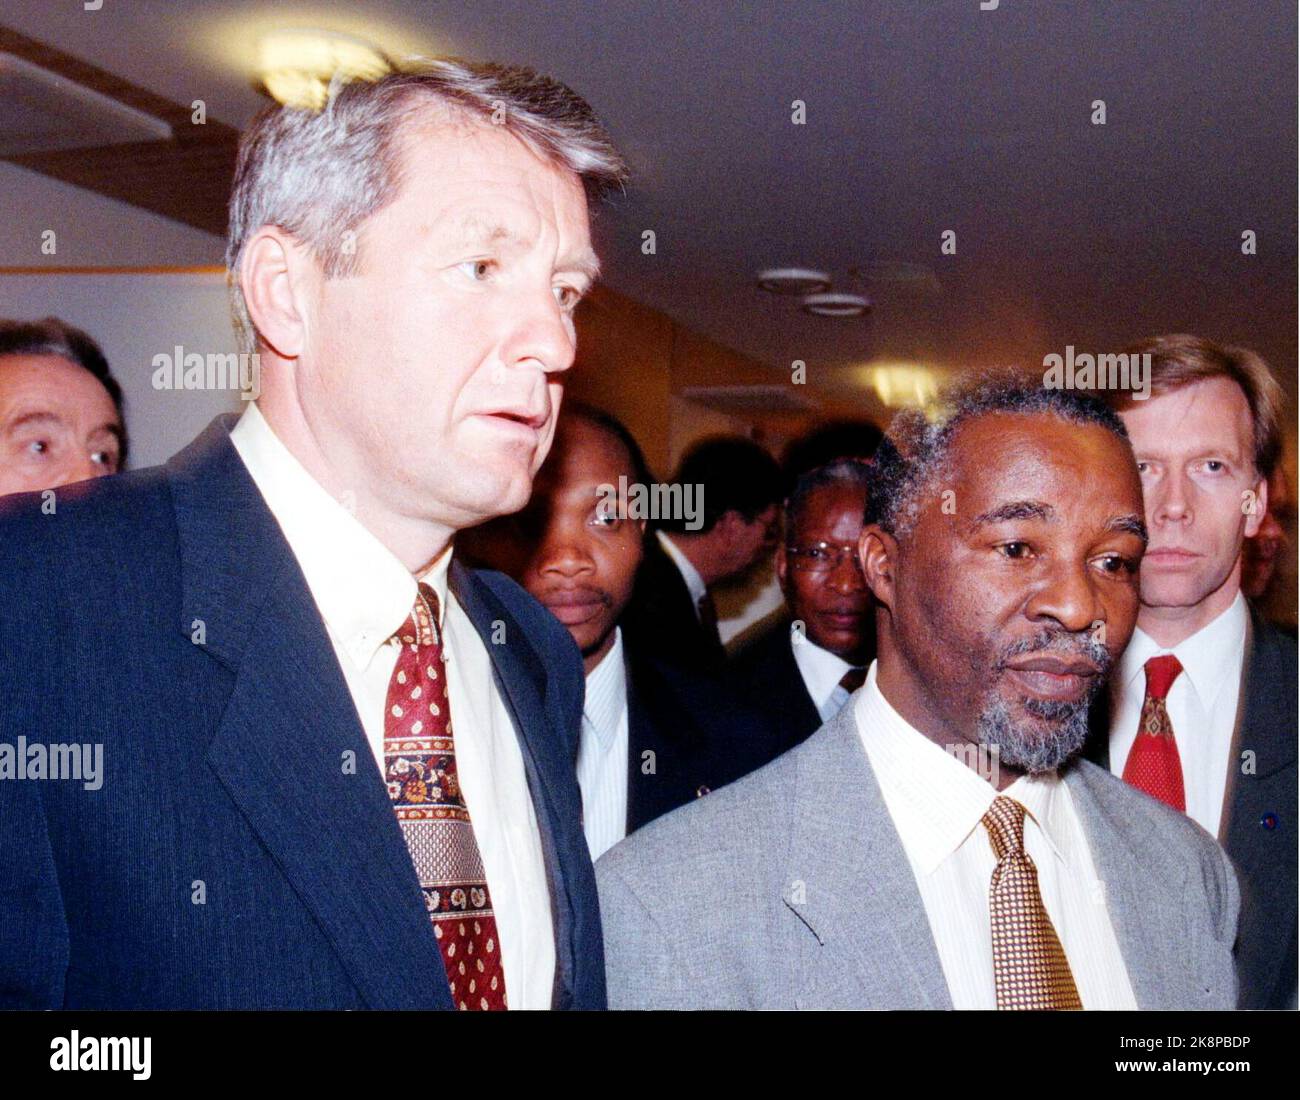 South Africa Vice President Thabo Mbeki with Prime Minister Thorbjørn Jagland. Mbeki is on an official visit to Norway. Stock Photo